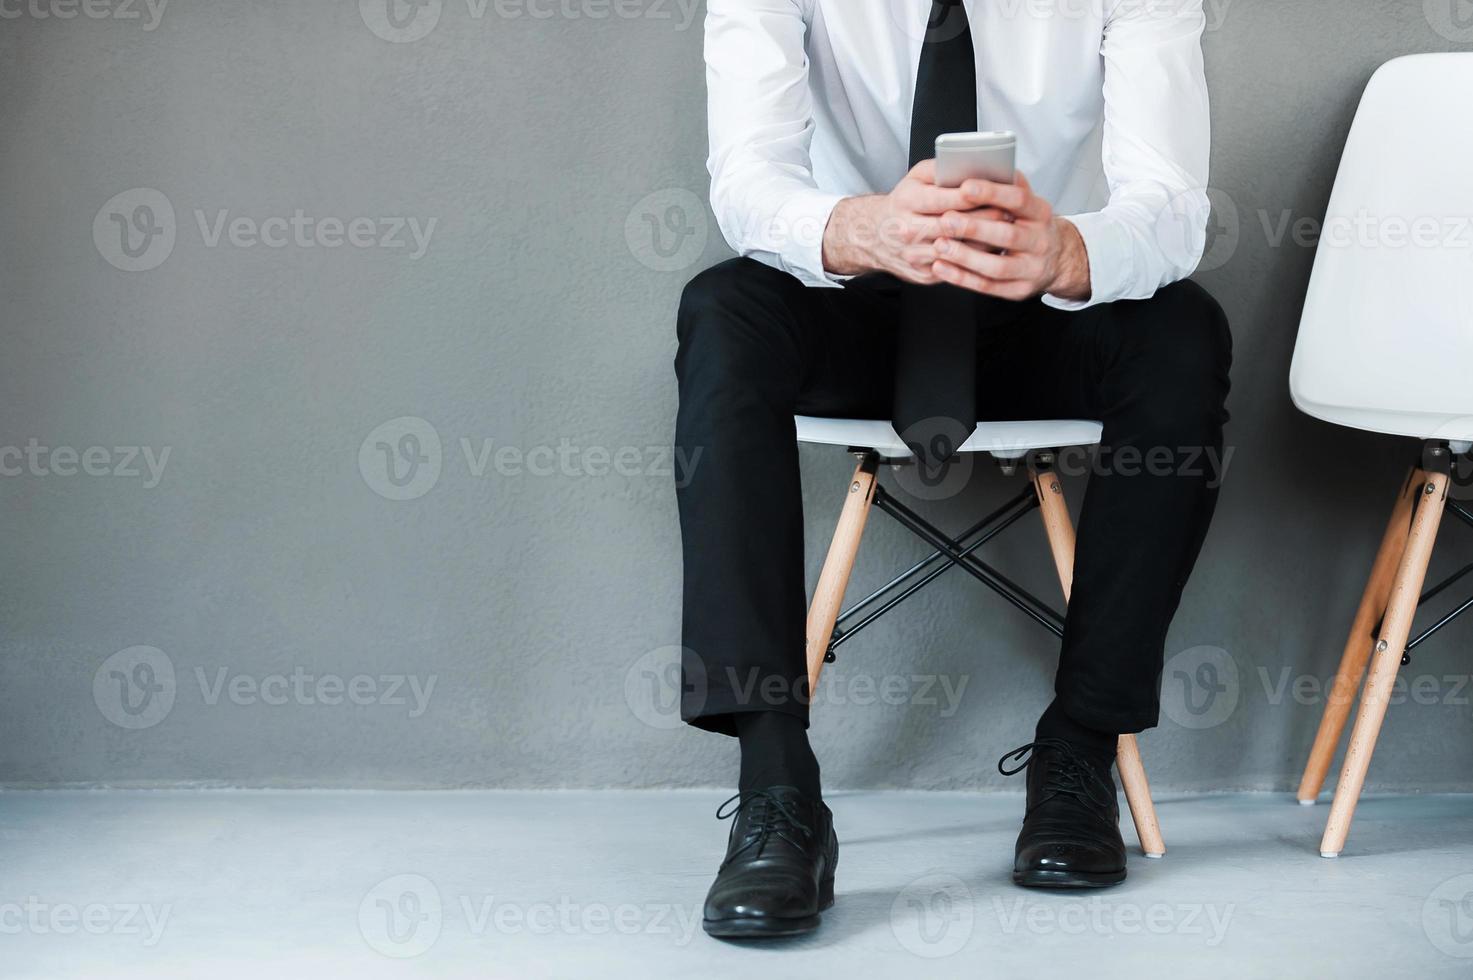 Sending business message. Close-up of young man in shirt and tie holding mobile phone while sitting on chair against grey background photo